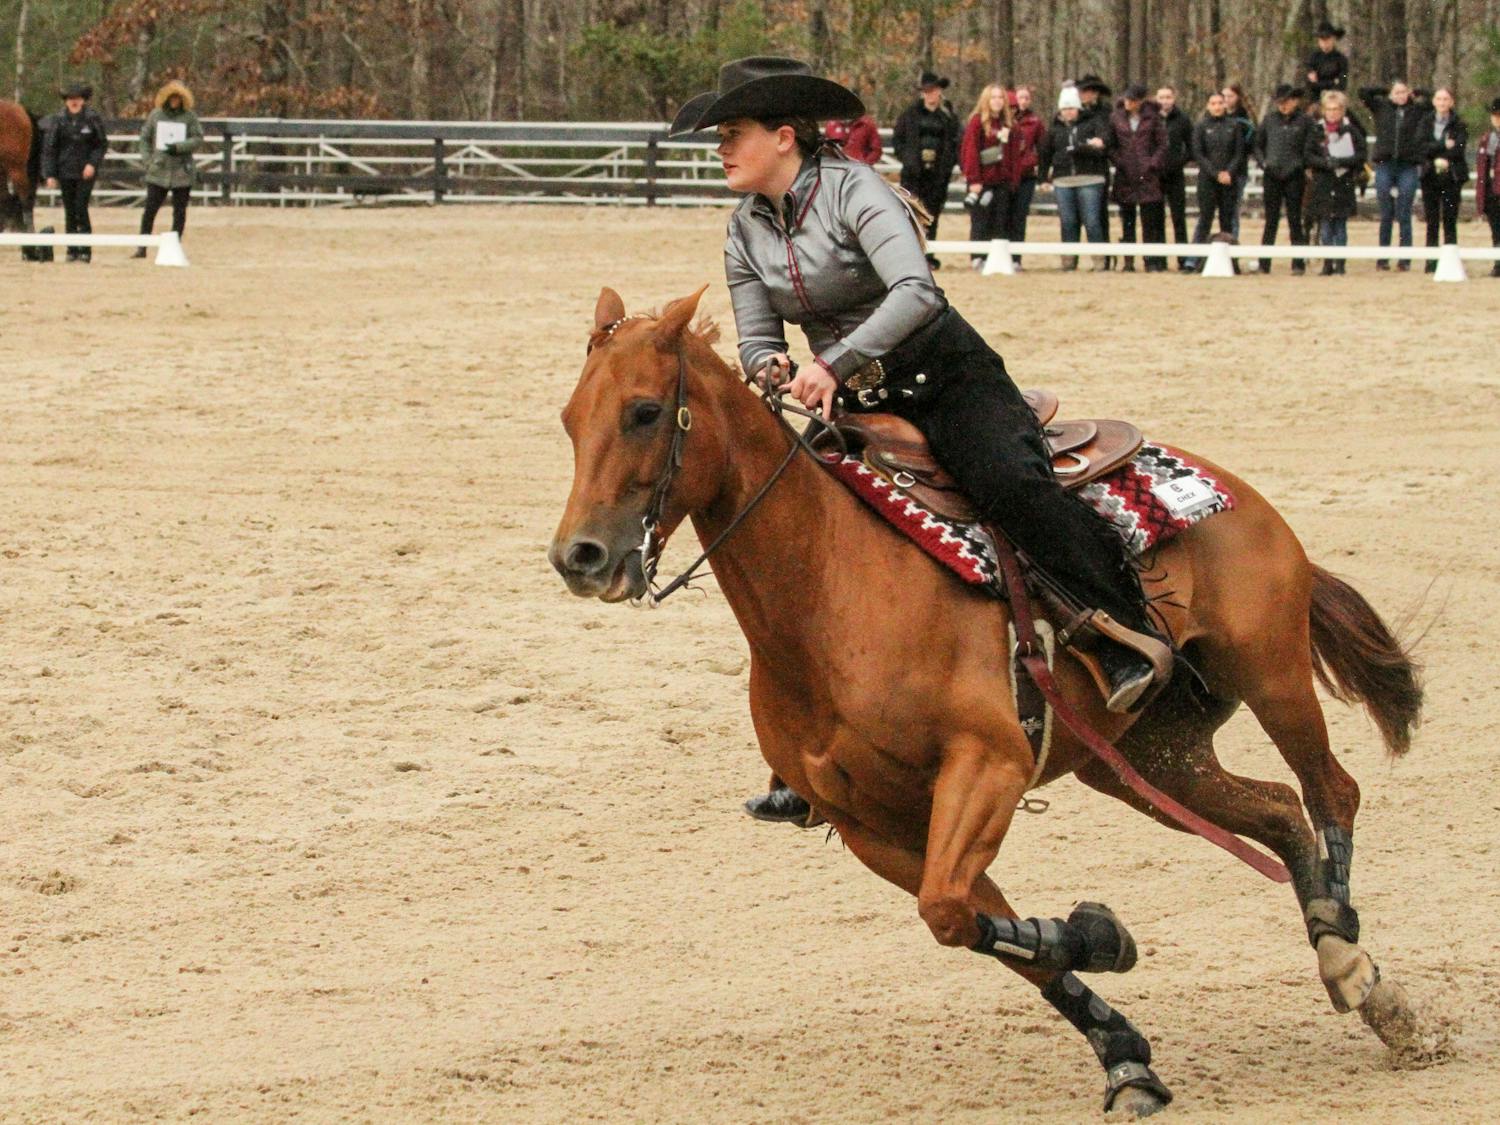 Senior Mary Margaret Coats, mounted on Chexie, competes in the reigning category during the meet against Texas A&amp;M at One Wood Farm on Feb. 11, 2023. In NCEA competition, you draw what order you compete in and ride the same horse as your opponent. Of all the horses at One Wood Farm, the one named Magnum is one of Coats' favorites. “(I) won my point on him several times,” Coats said. “He is a good boy every time, and he loves being a Gamecock.”&nbsp;